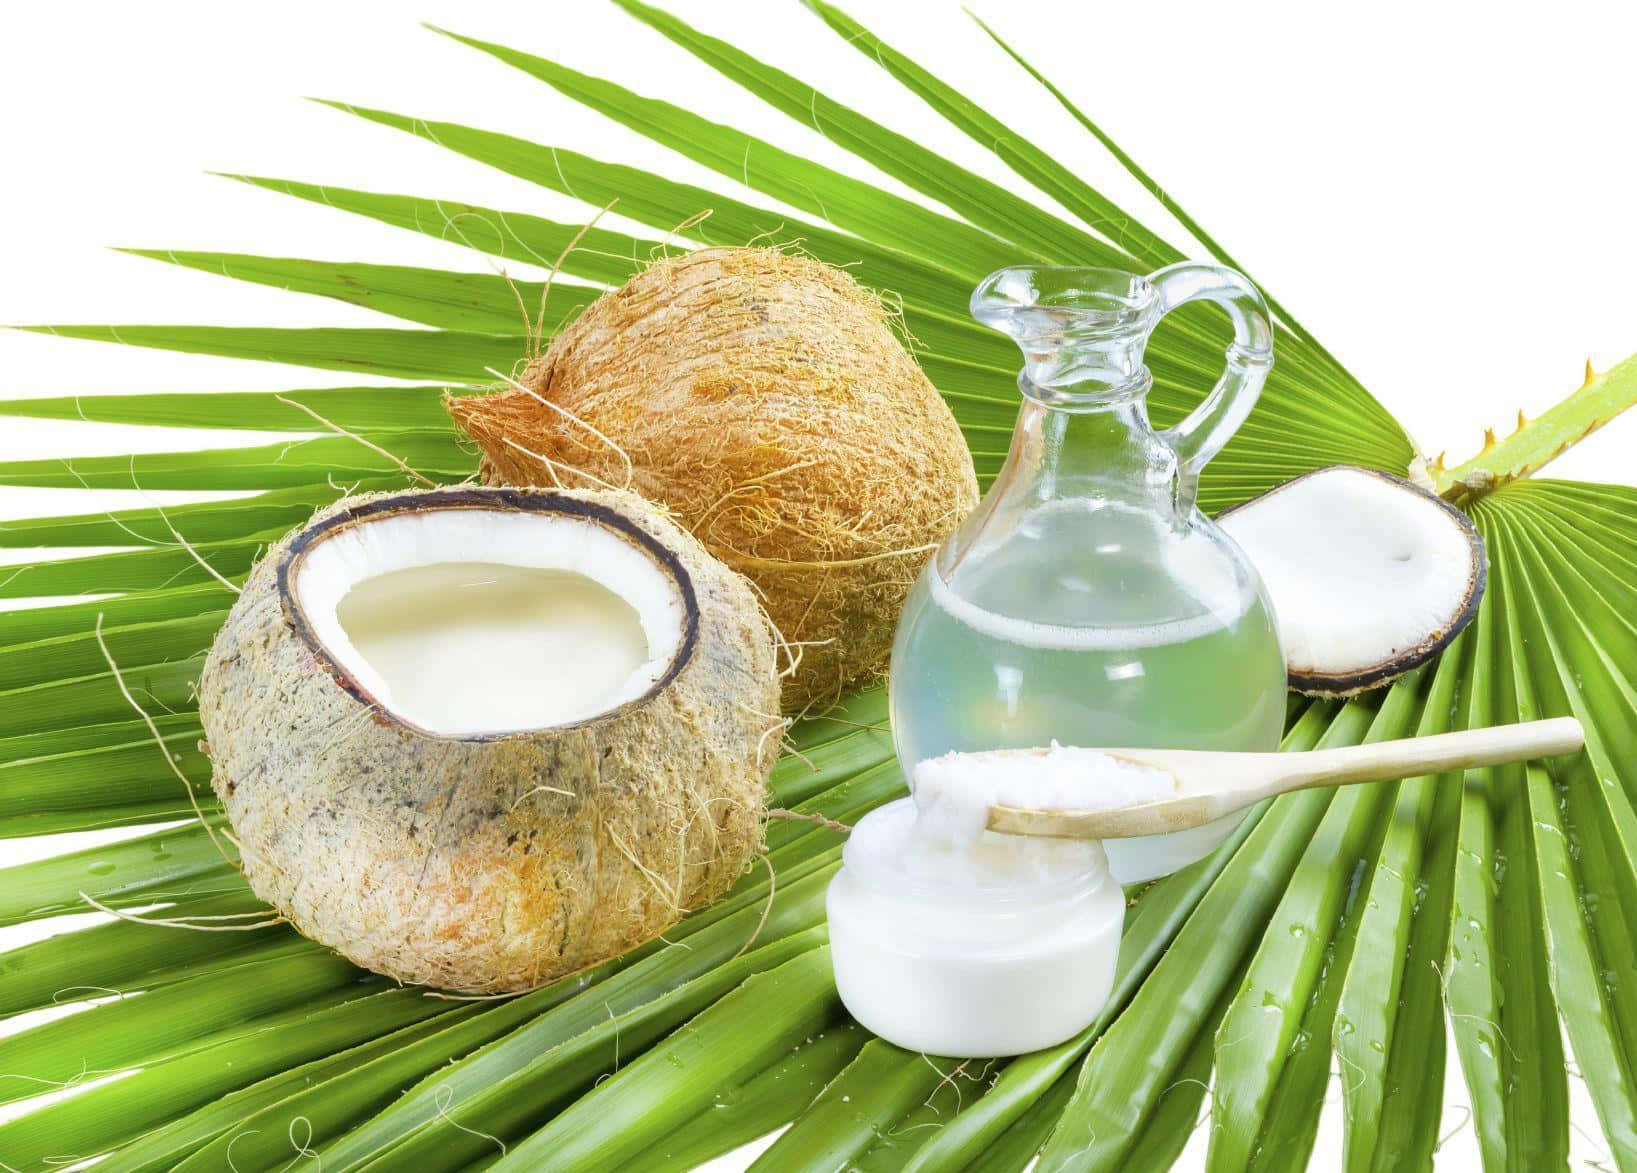 Coconut Oil And Coconut Leaves On A White Background